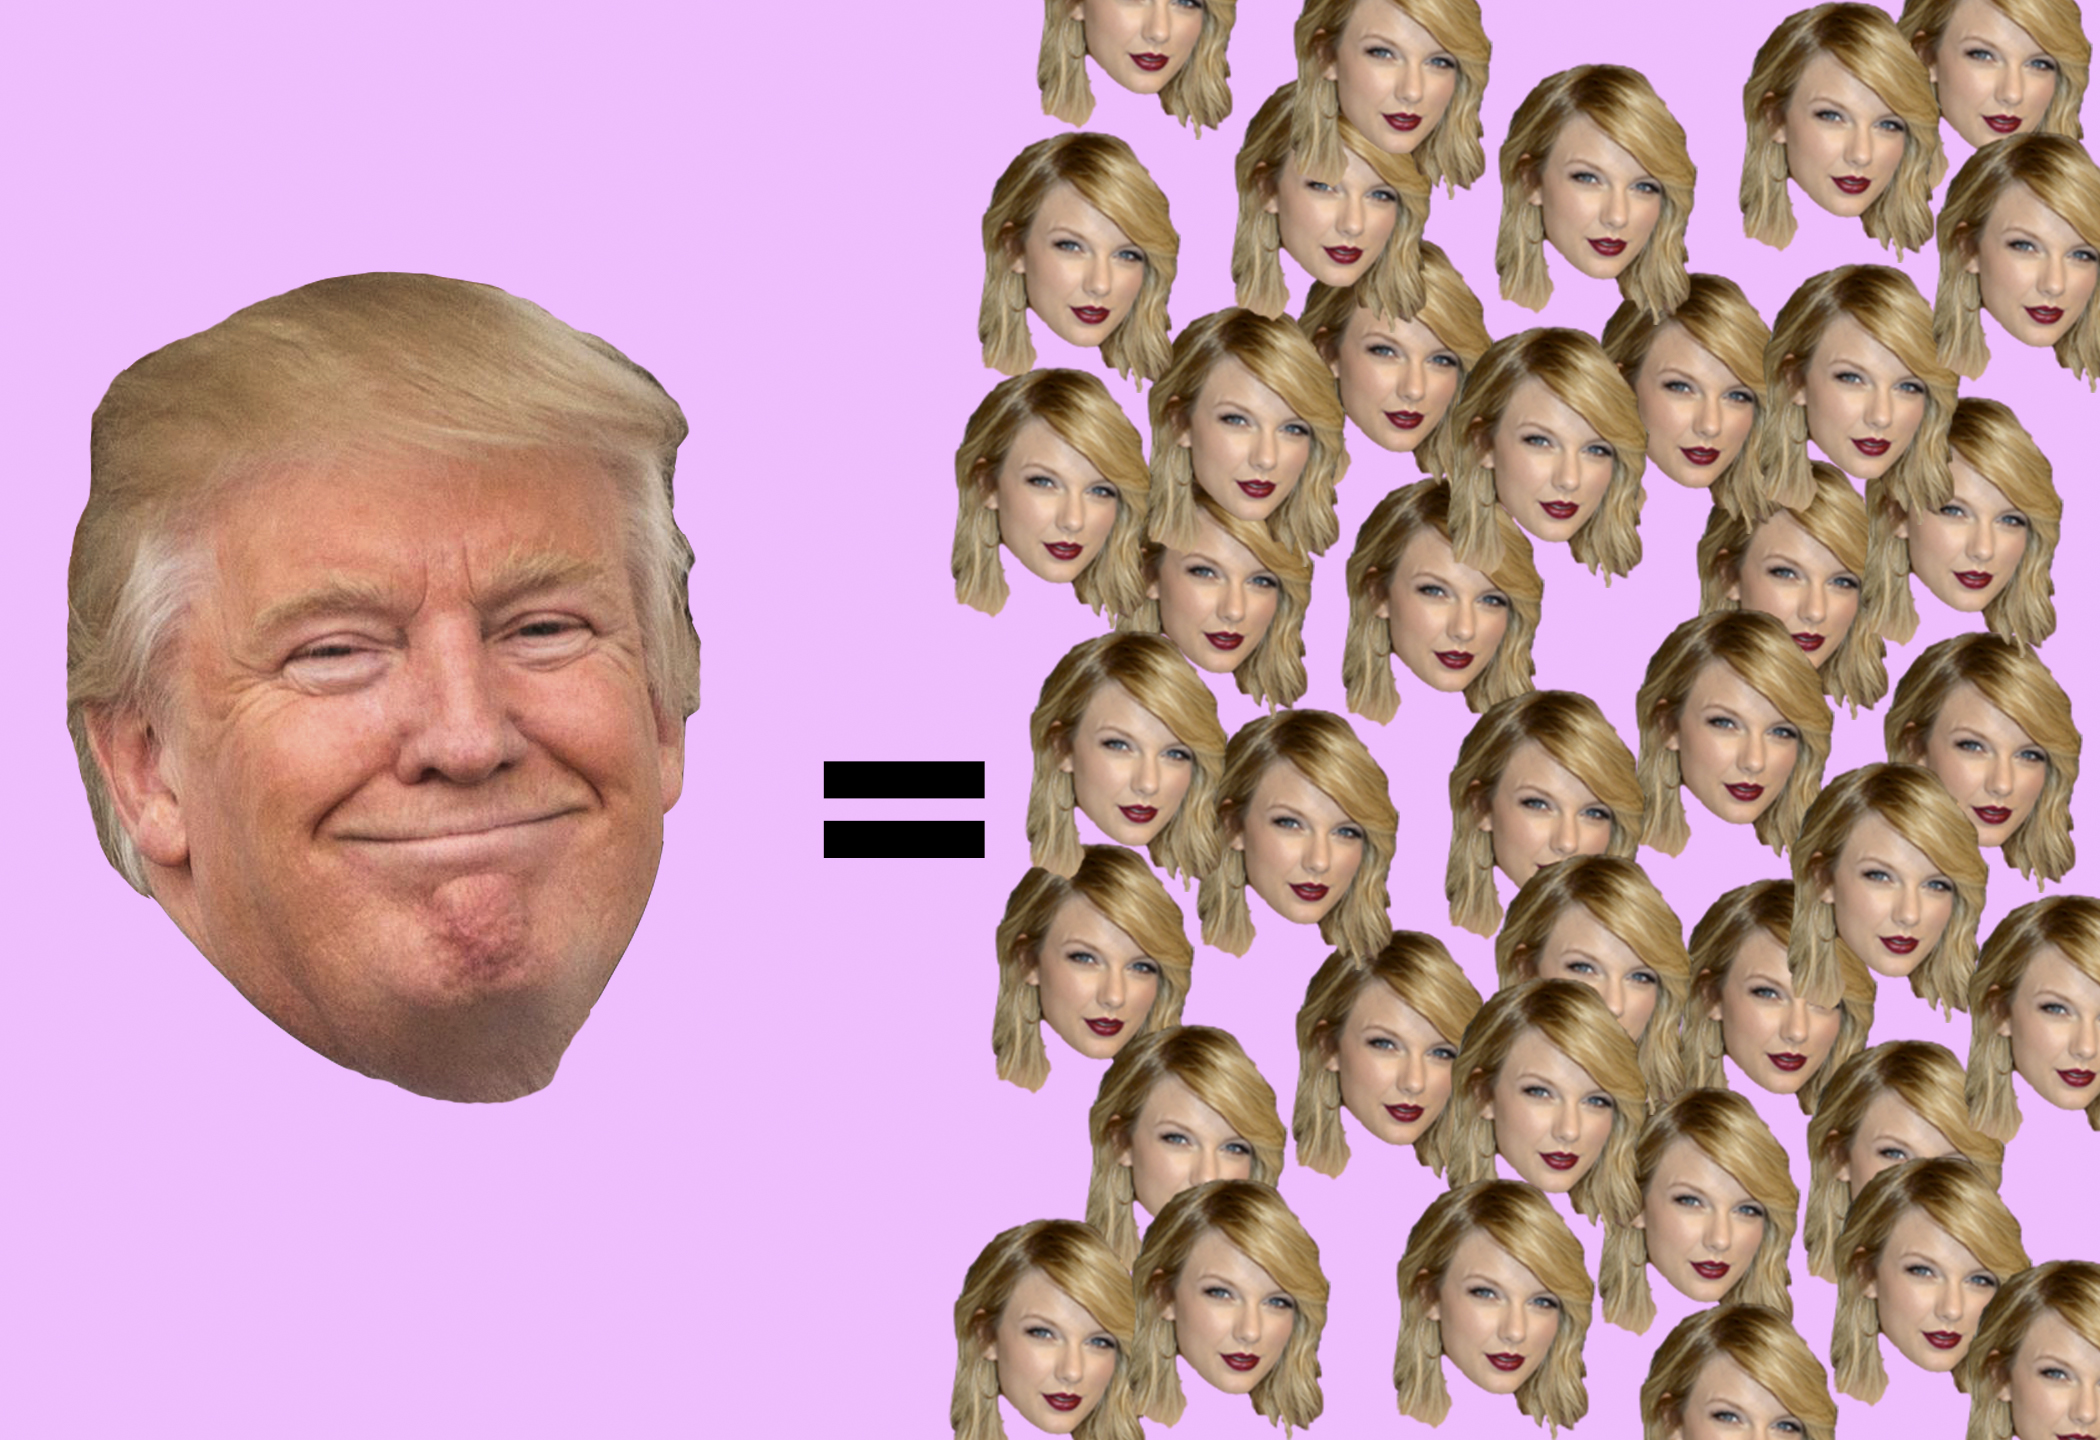 We Calculated the Net Worth of Donald Trump's Cabinet in Units of Taylor Swift